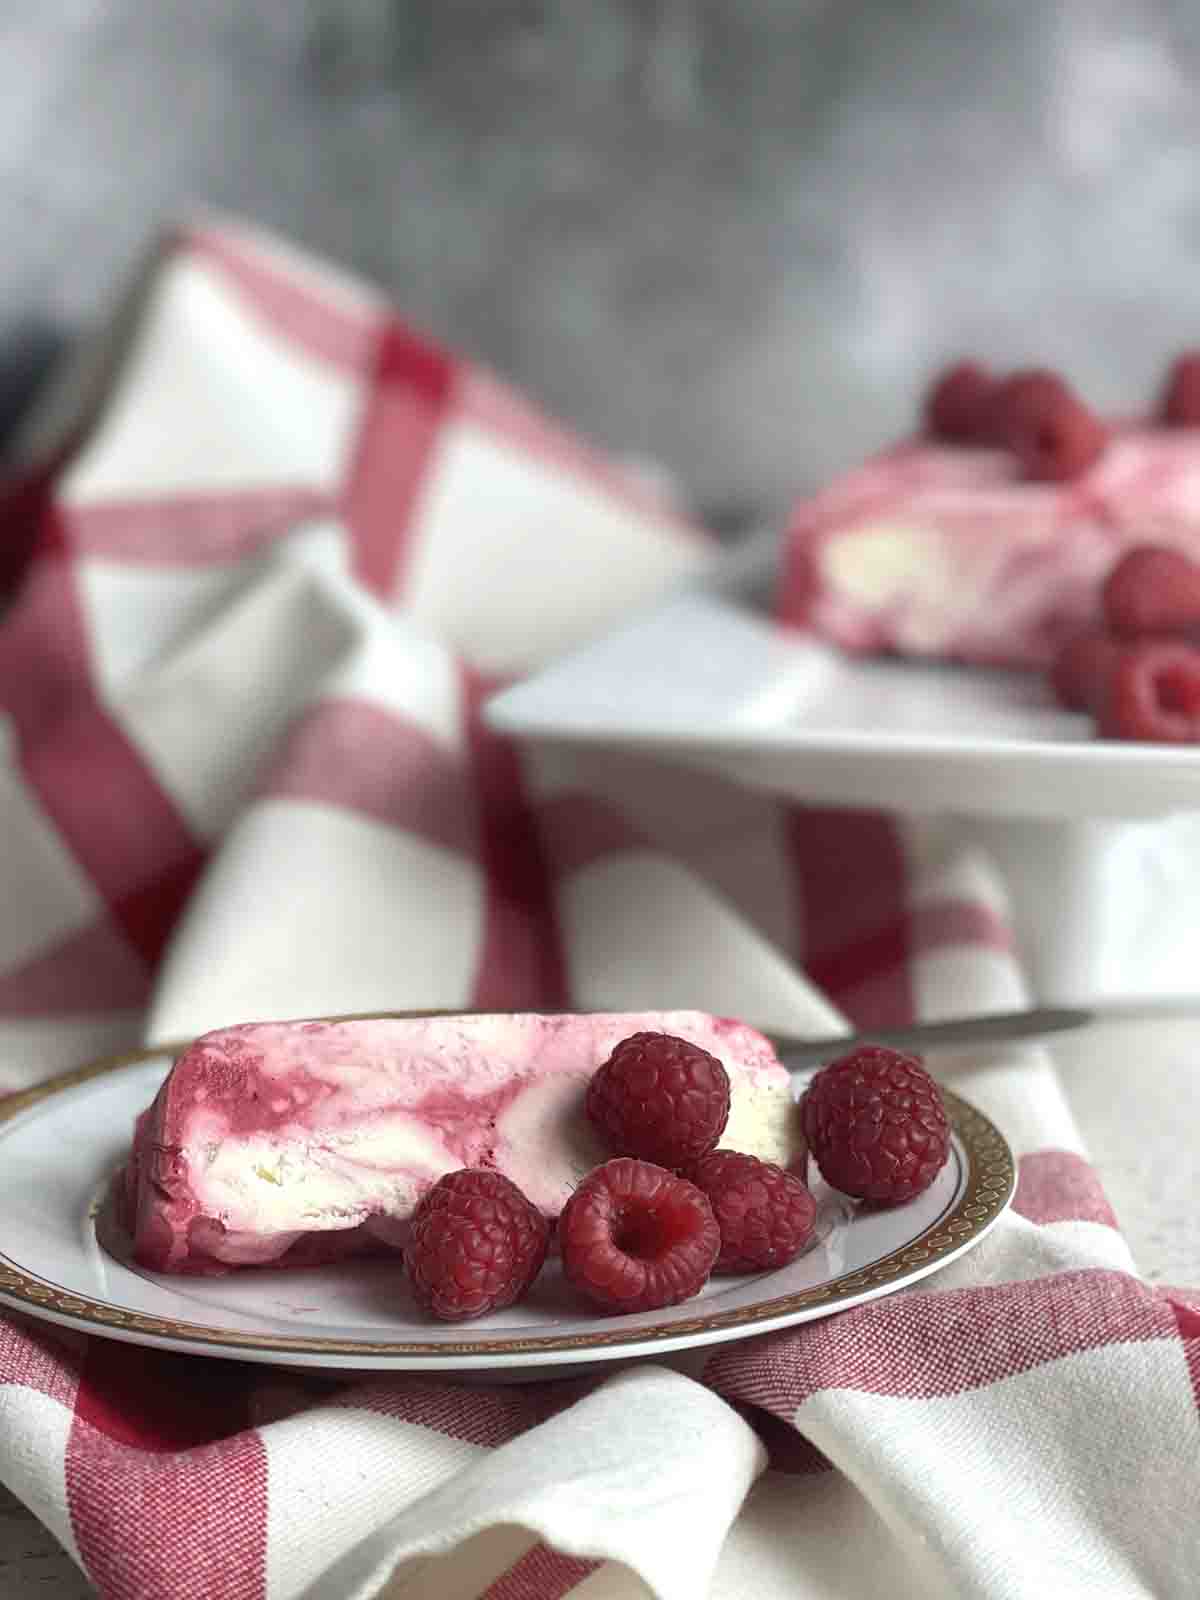 slices of raspberry parfait on a plate with dessert in the background.